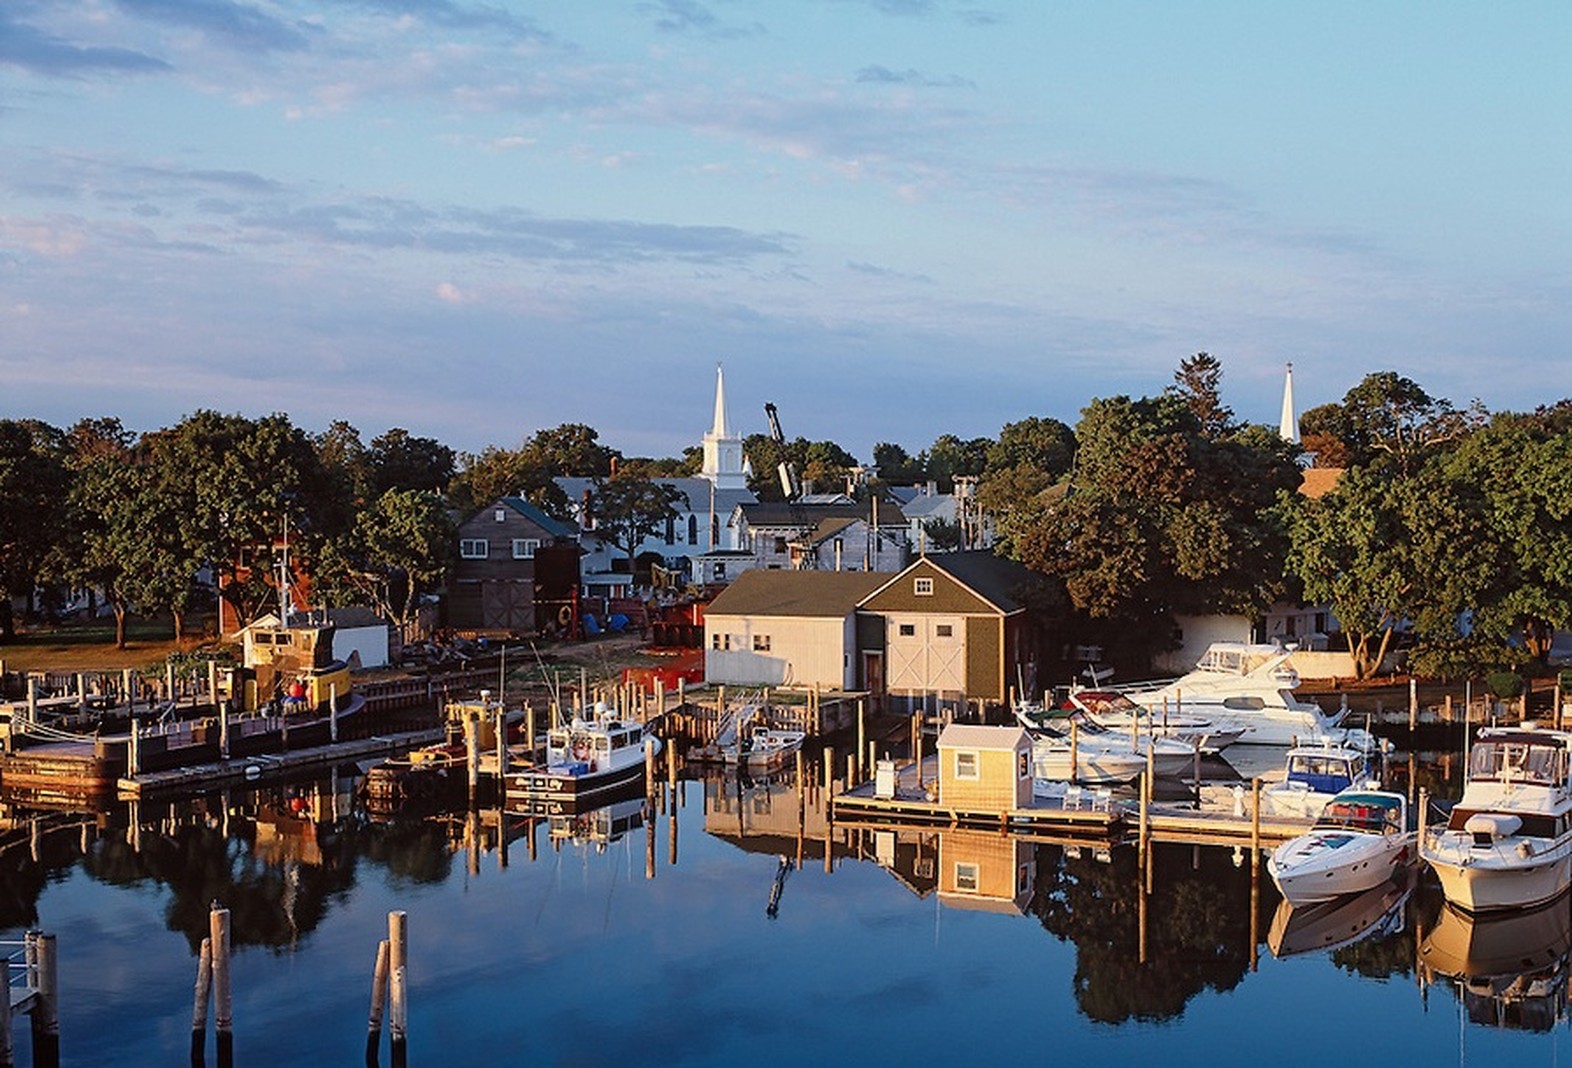 Image of a waterfront village on the North Fork.